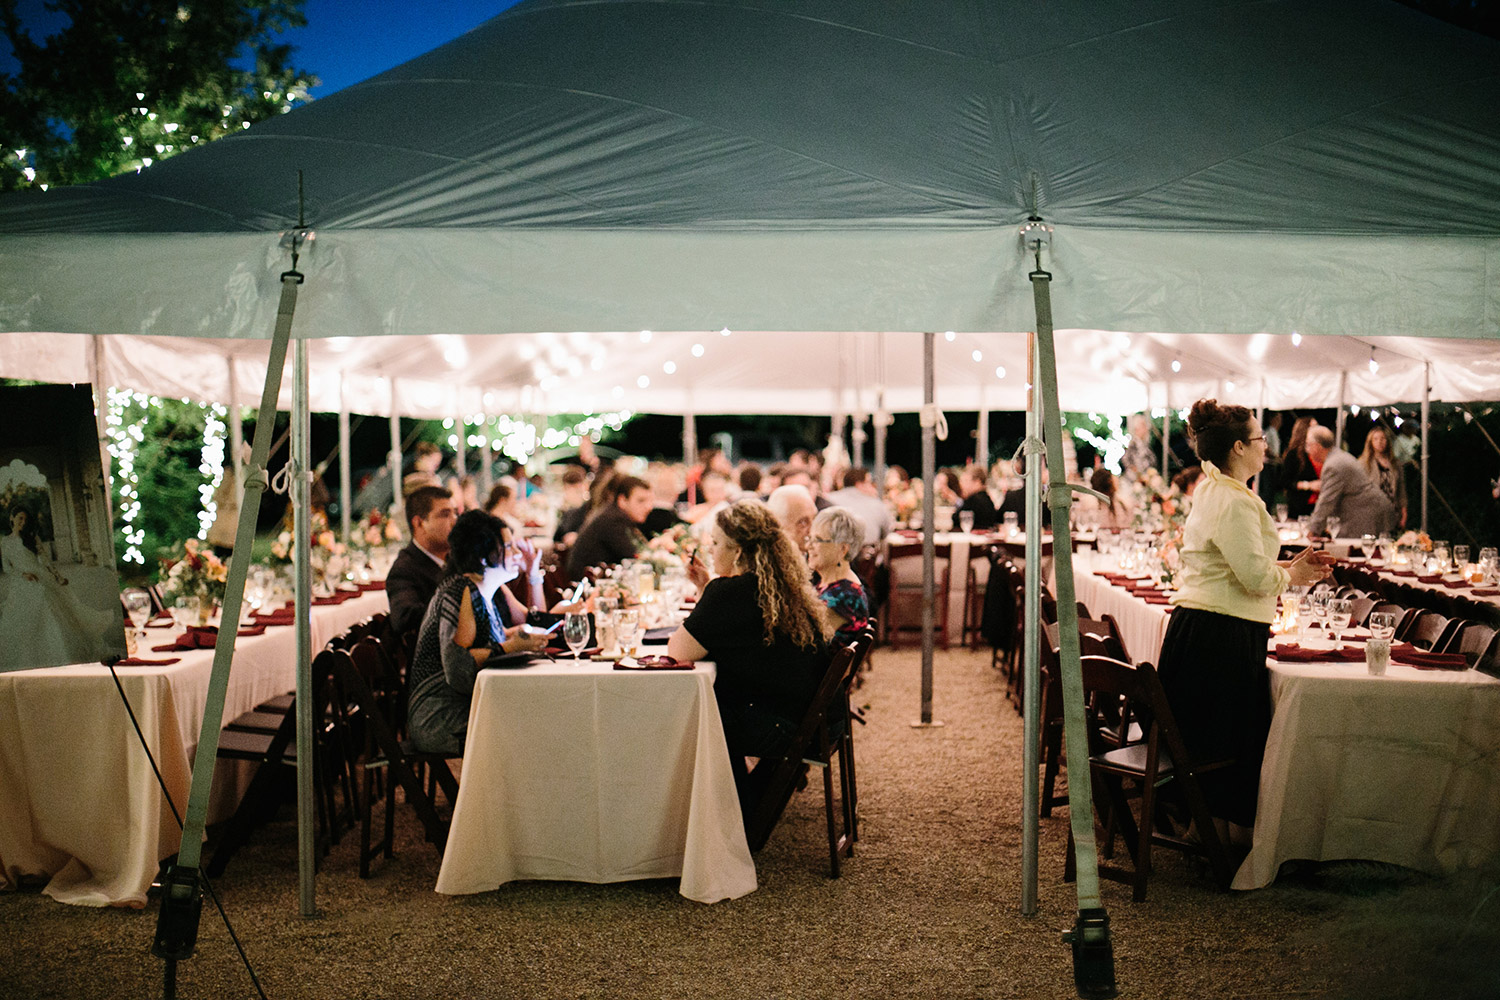 Texas tented wedding at night with hanging cafe lights